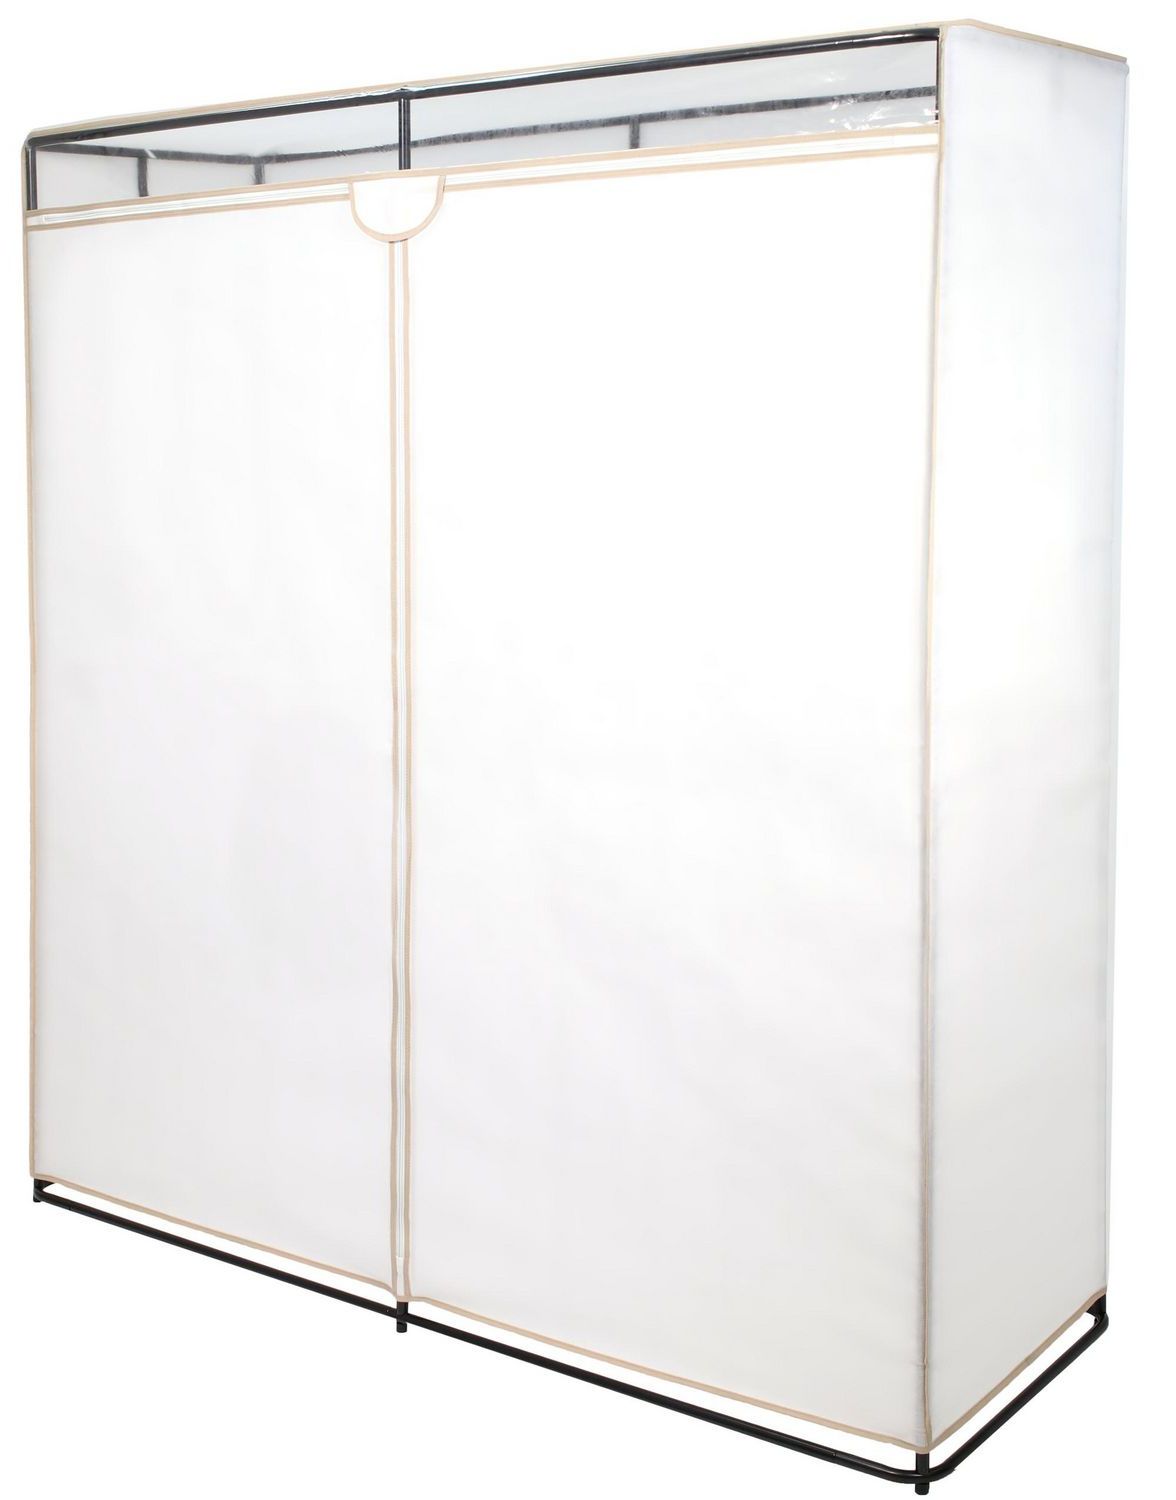 Tidyliving Extra Wide Single Tier Zippered Clothes Closet, 60" | Walmart  Canada Pertaining To Single Tier Zippered Wardrobes (Gallery 8 of 20)